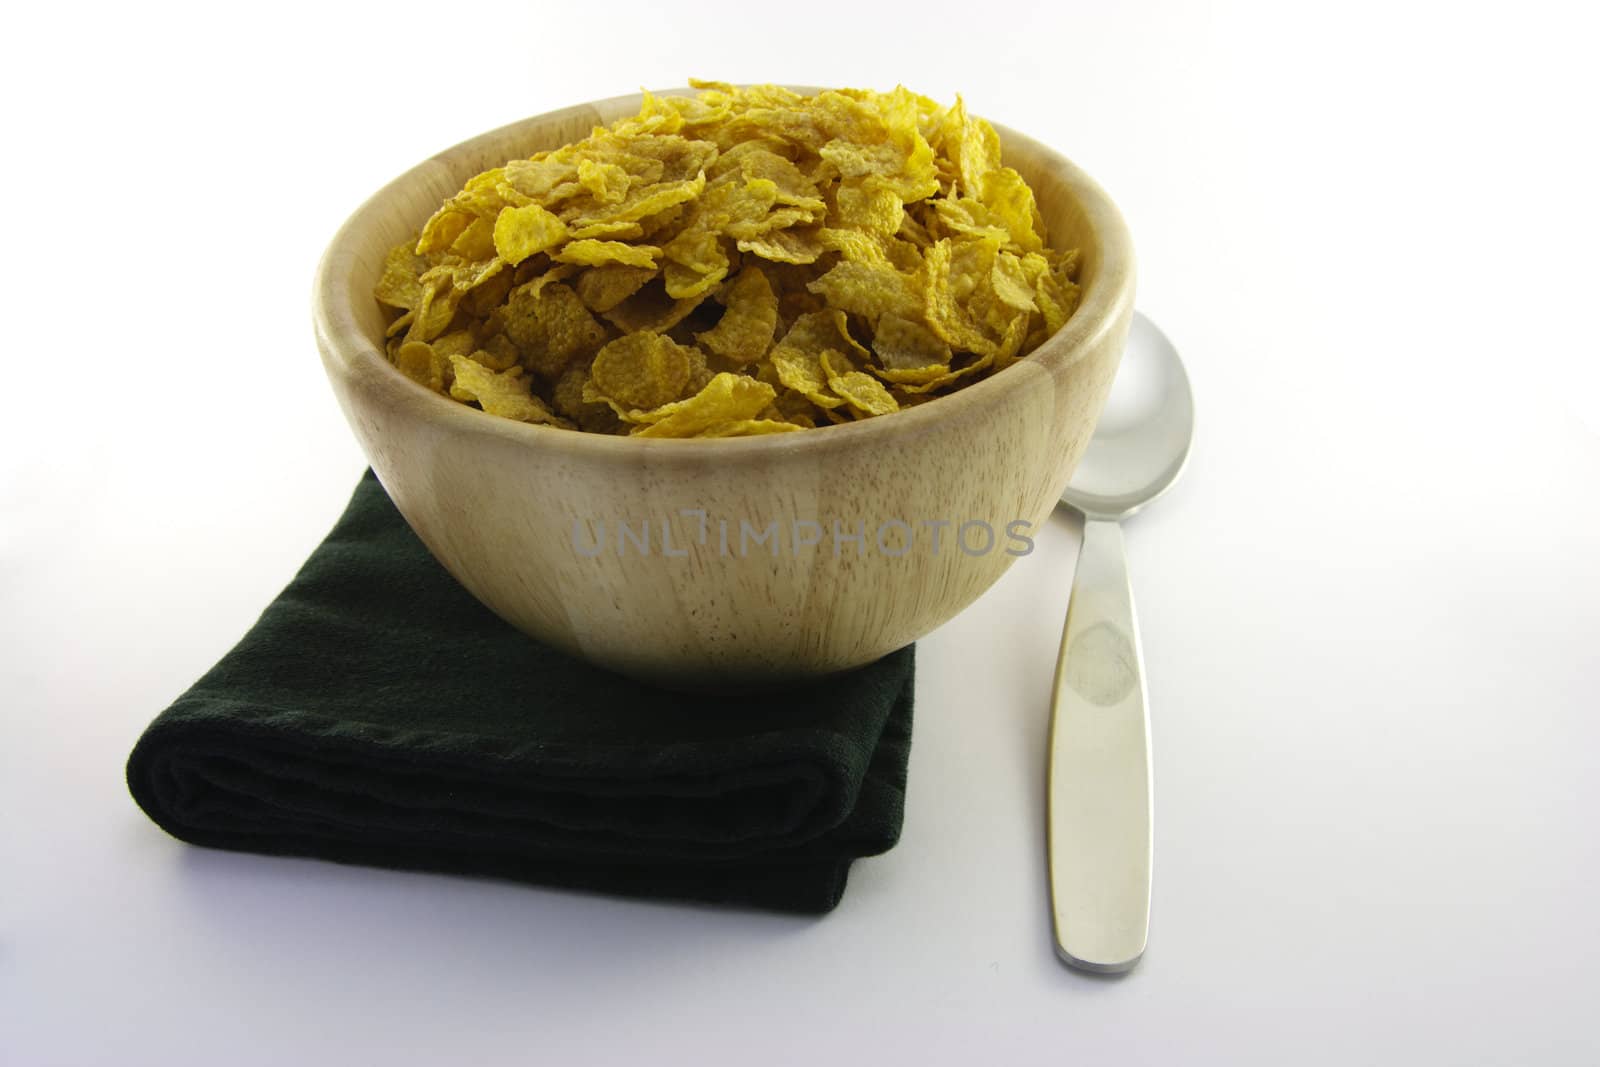 Cornflakes in a Wooden Bowl with Spoon by KeithWilson